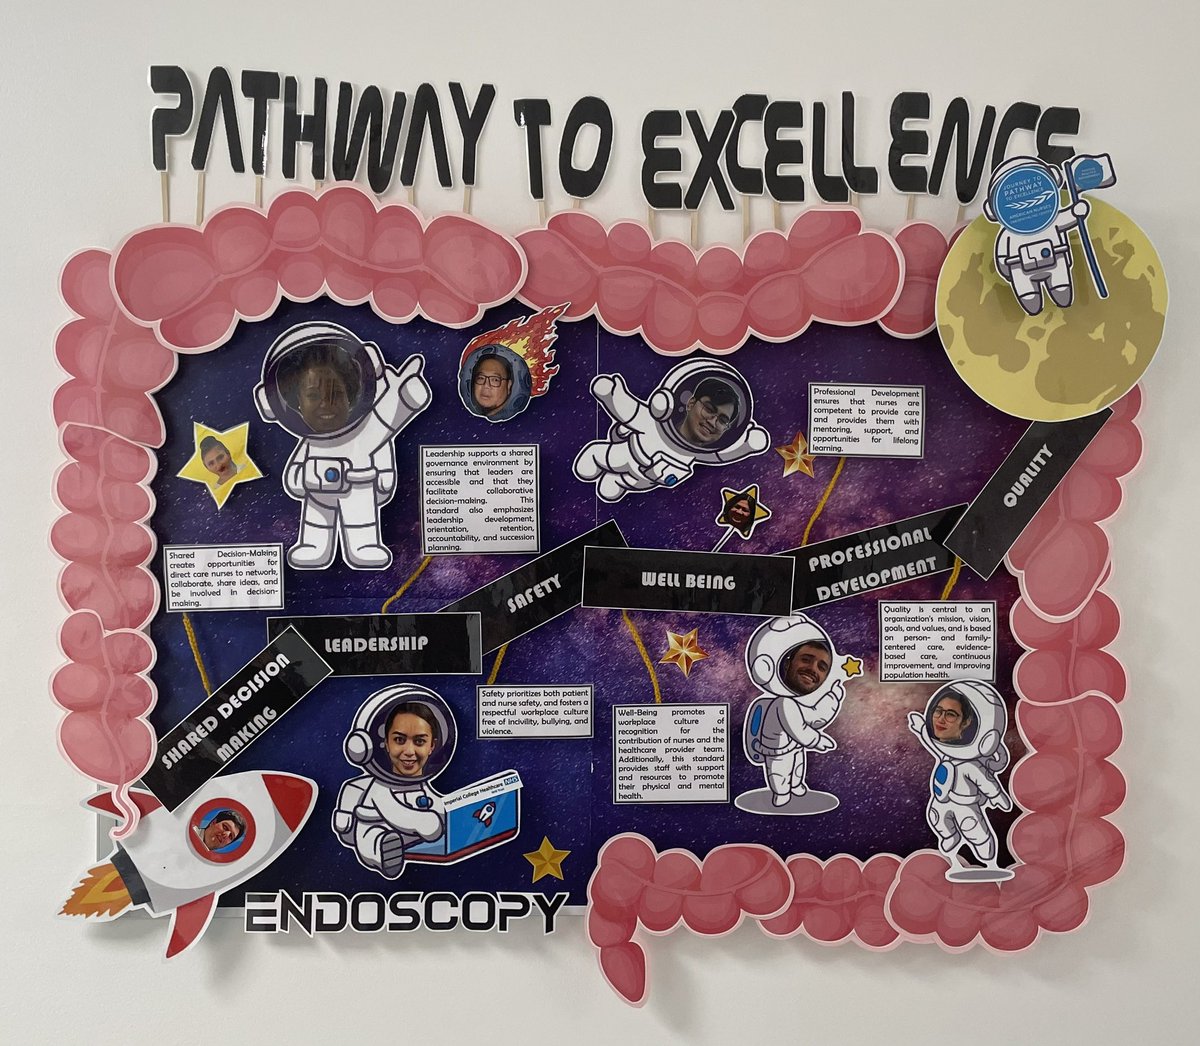 The pic doesn’t do this AMAZING Pathway poster justice - it’s 3D! Spotted in CXH Endoscopy on our Ward Accred visit yesterday. Thanks for having us, Maria and team 🪐🚀 ☄️⭐️

@rob_latch @SusanGiles70 @smurphy_nurse @MLU_1981 @SigsworthJanice